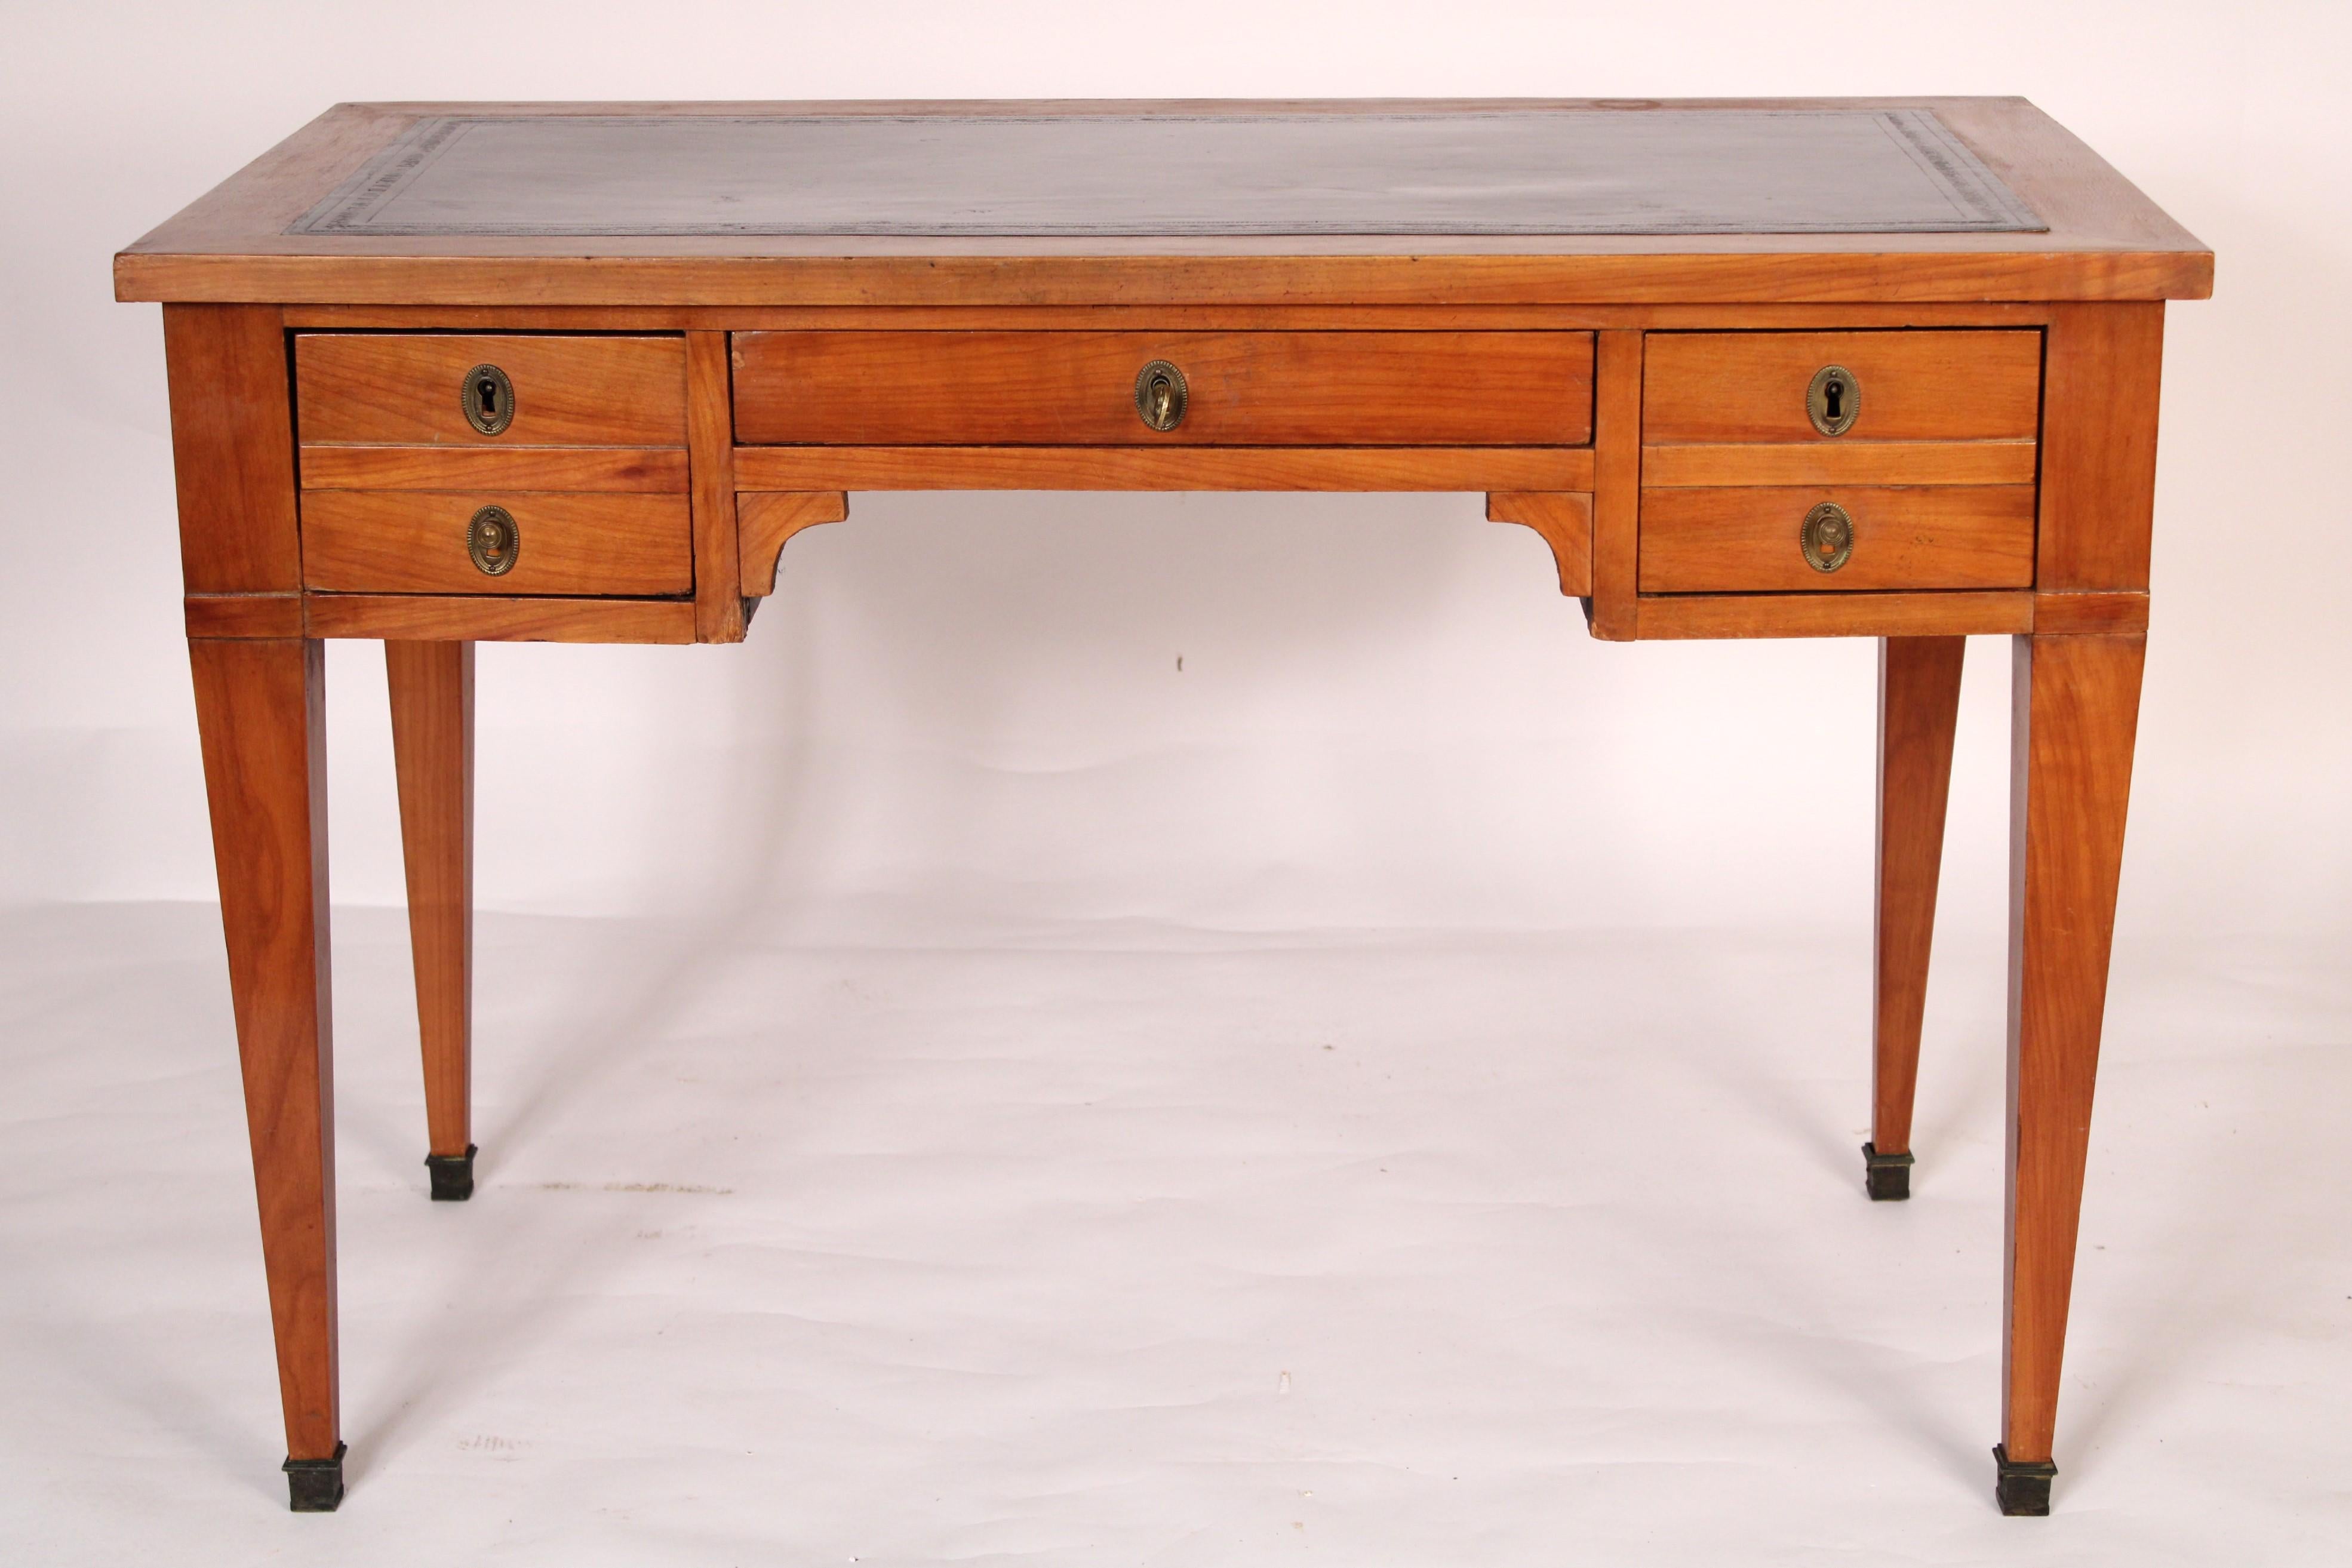 Directoire Style fruitwood leather top writing table / desk made from 19th century and later elements. With a rectangular leather top with fruitwood borders, central frieze drawer flanked by one double drawer on both right and left sides, sides with